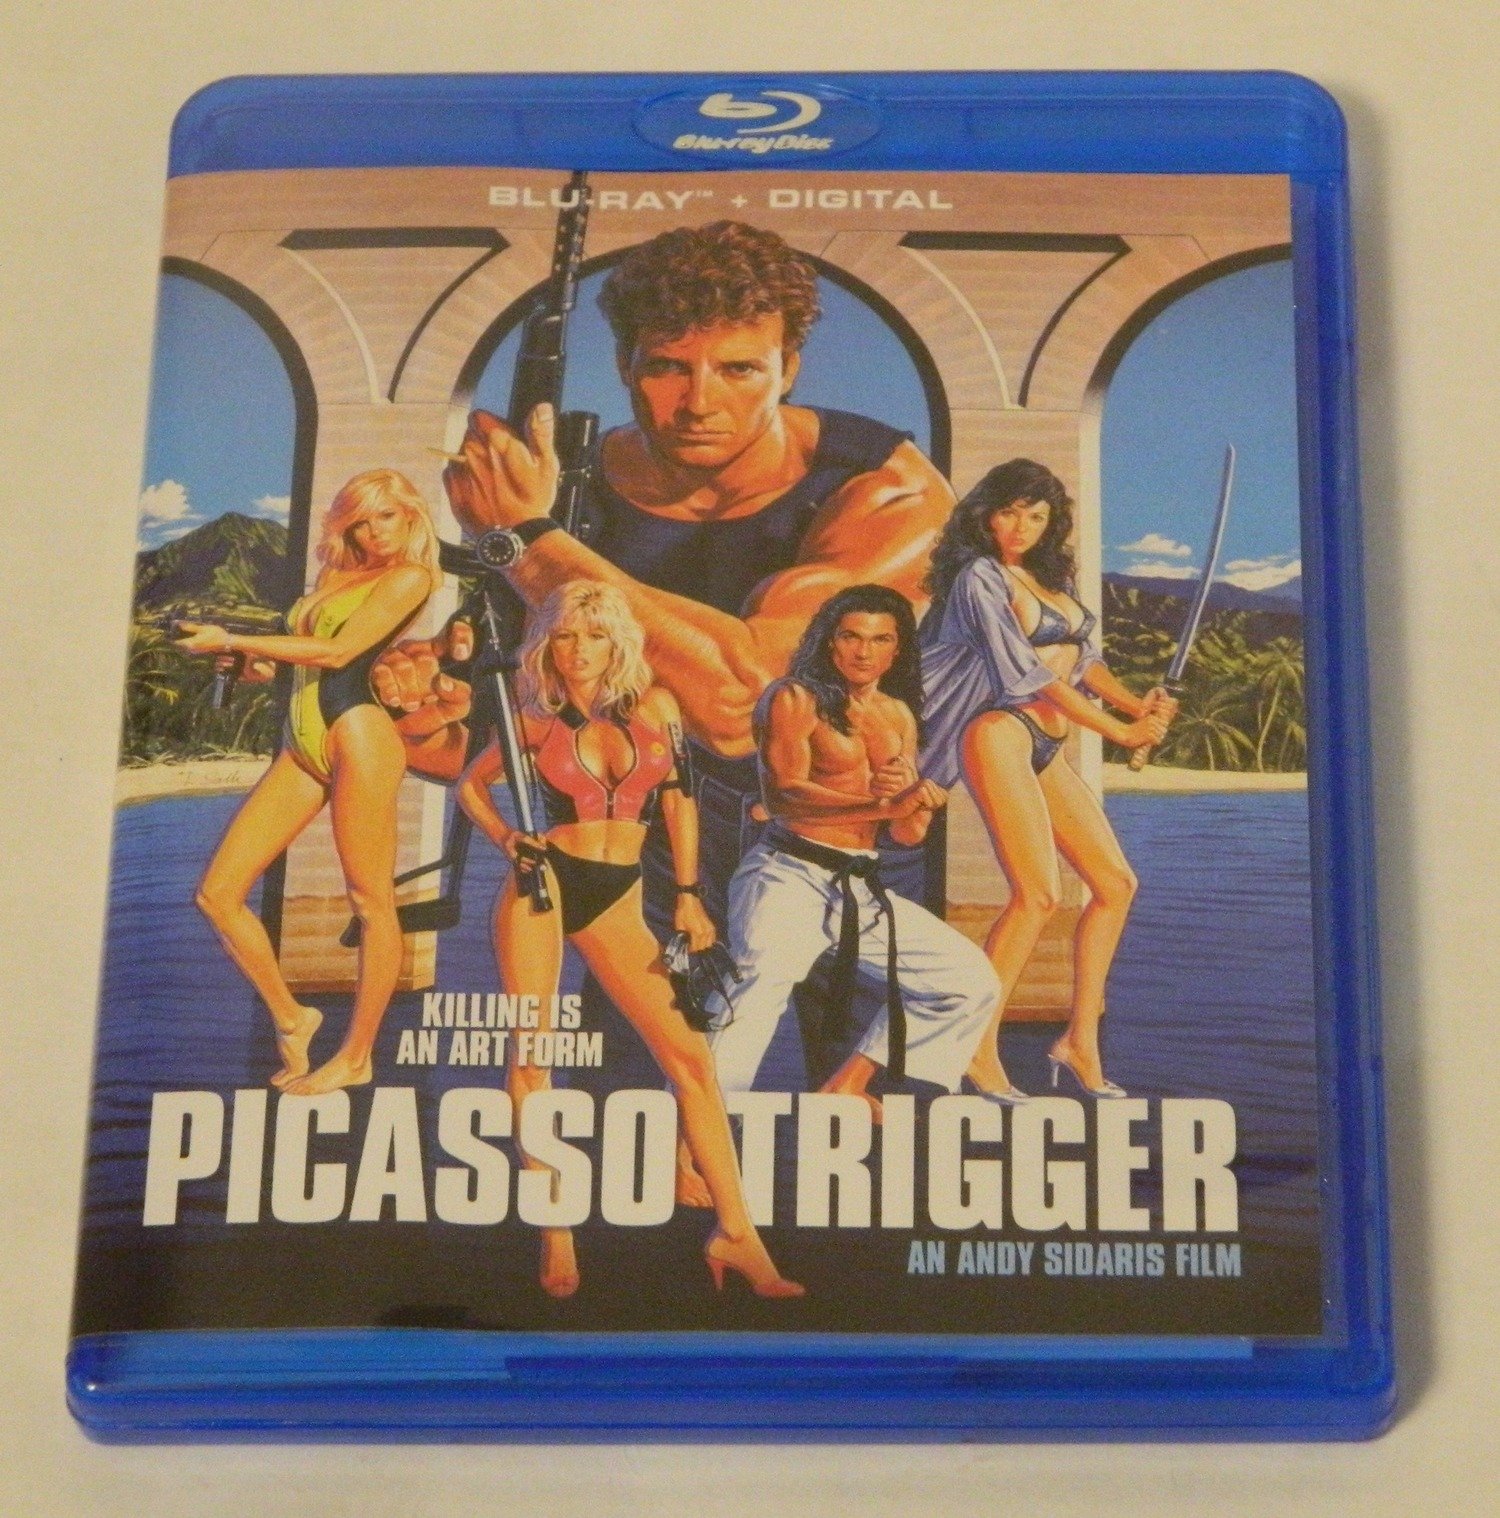 Picasso Trigger Blu-ray Review